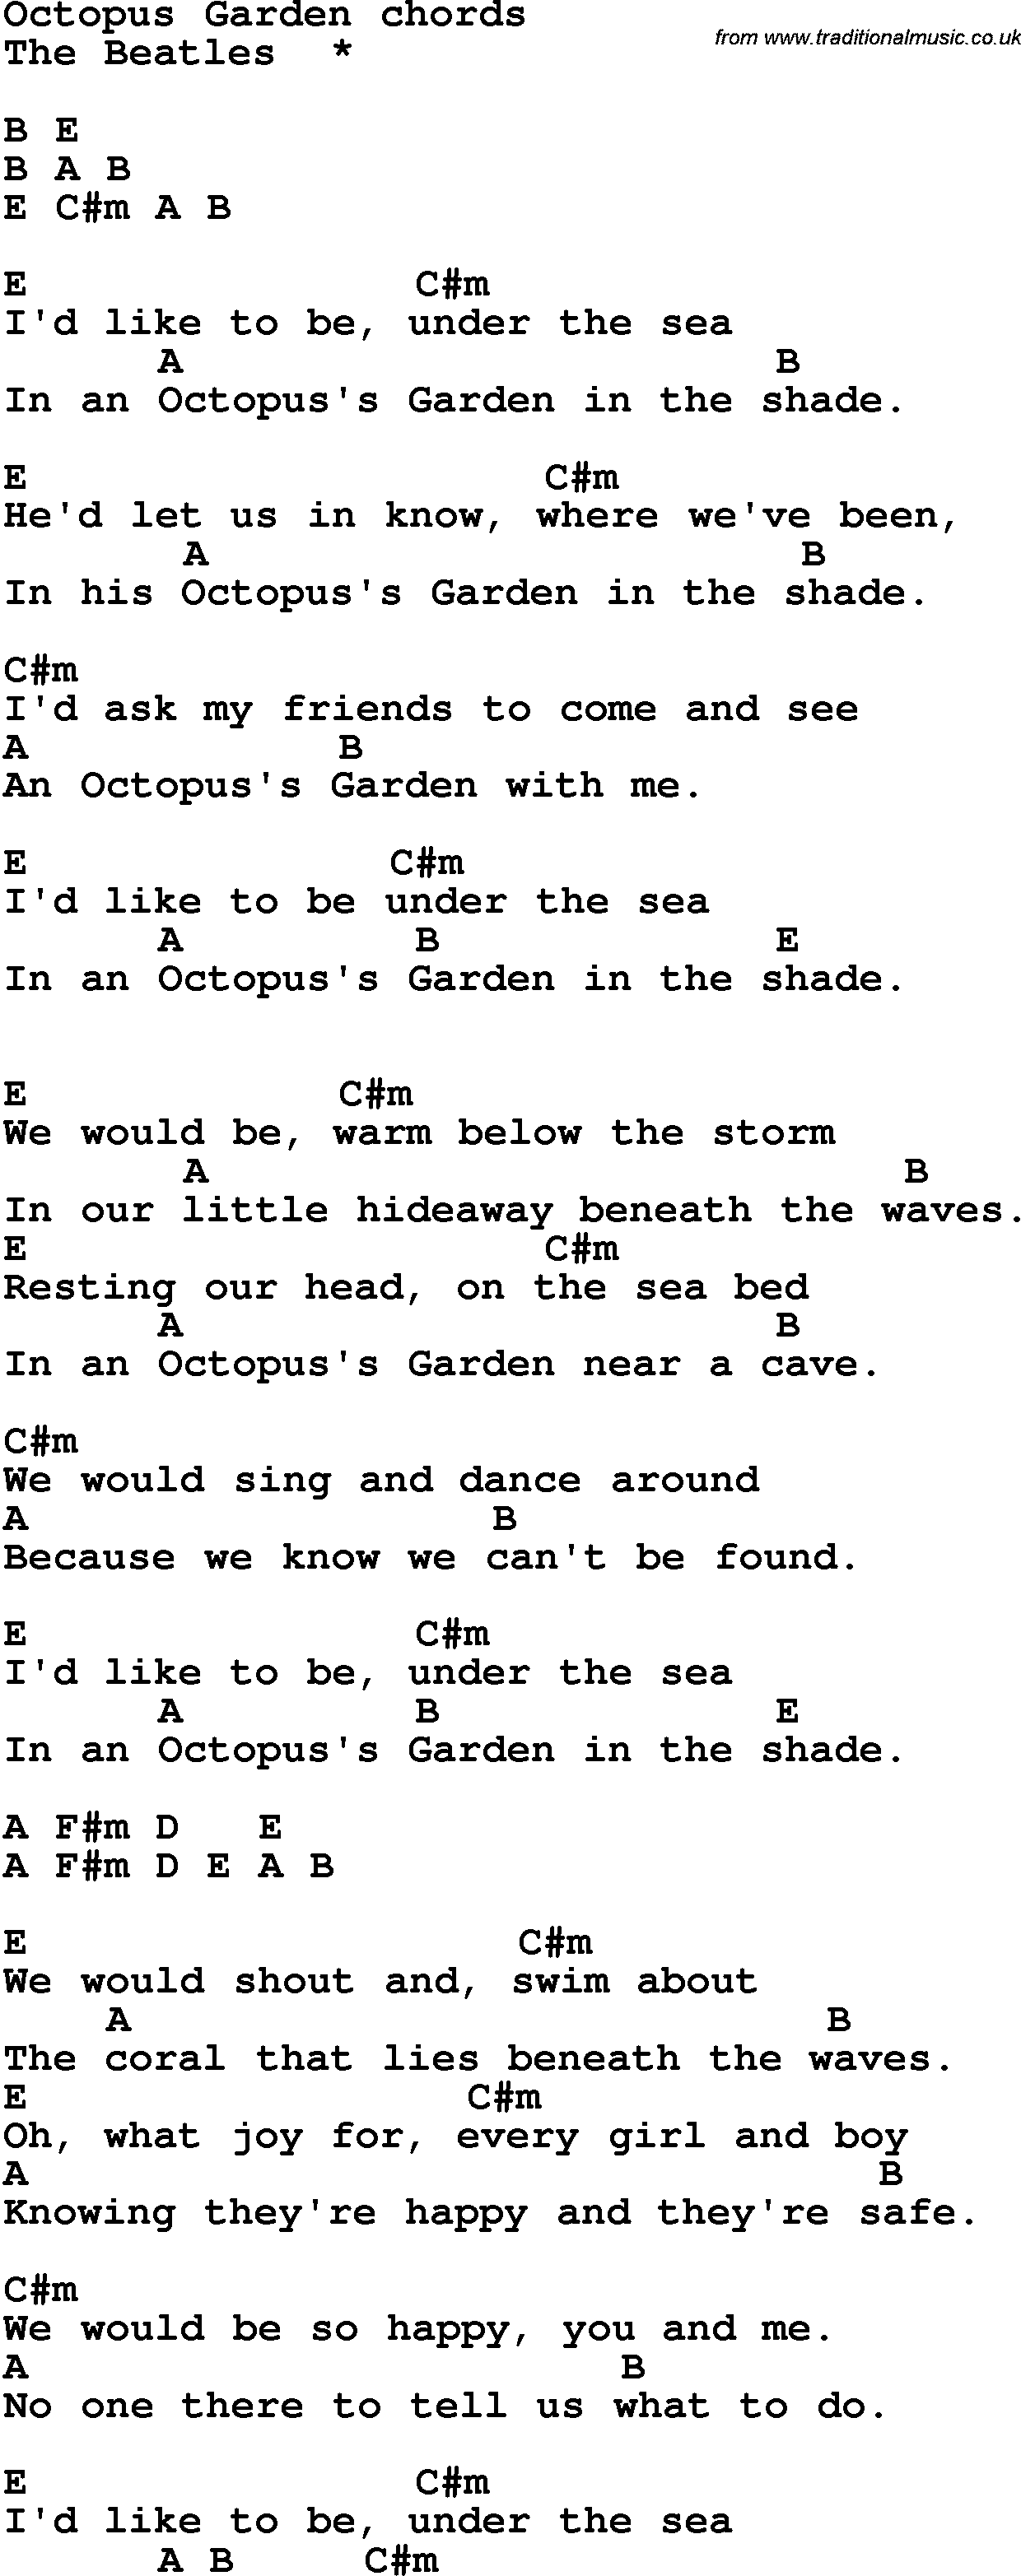 Song Lyrics with guitar chords for Octopus Garden - The Beatles